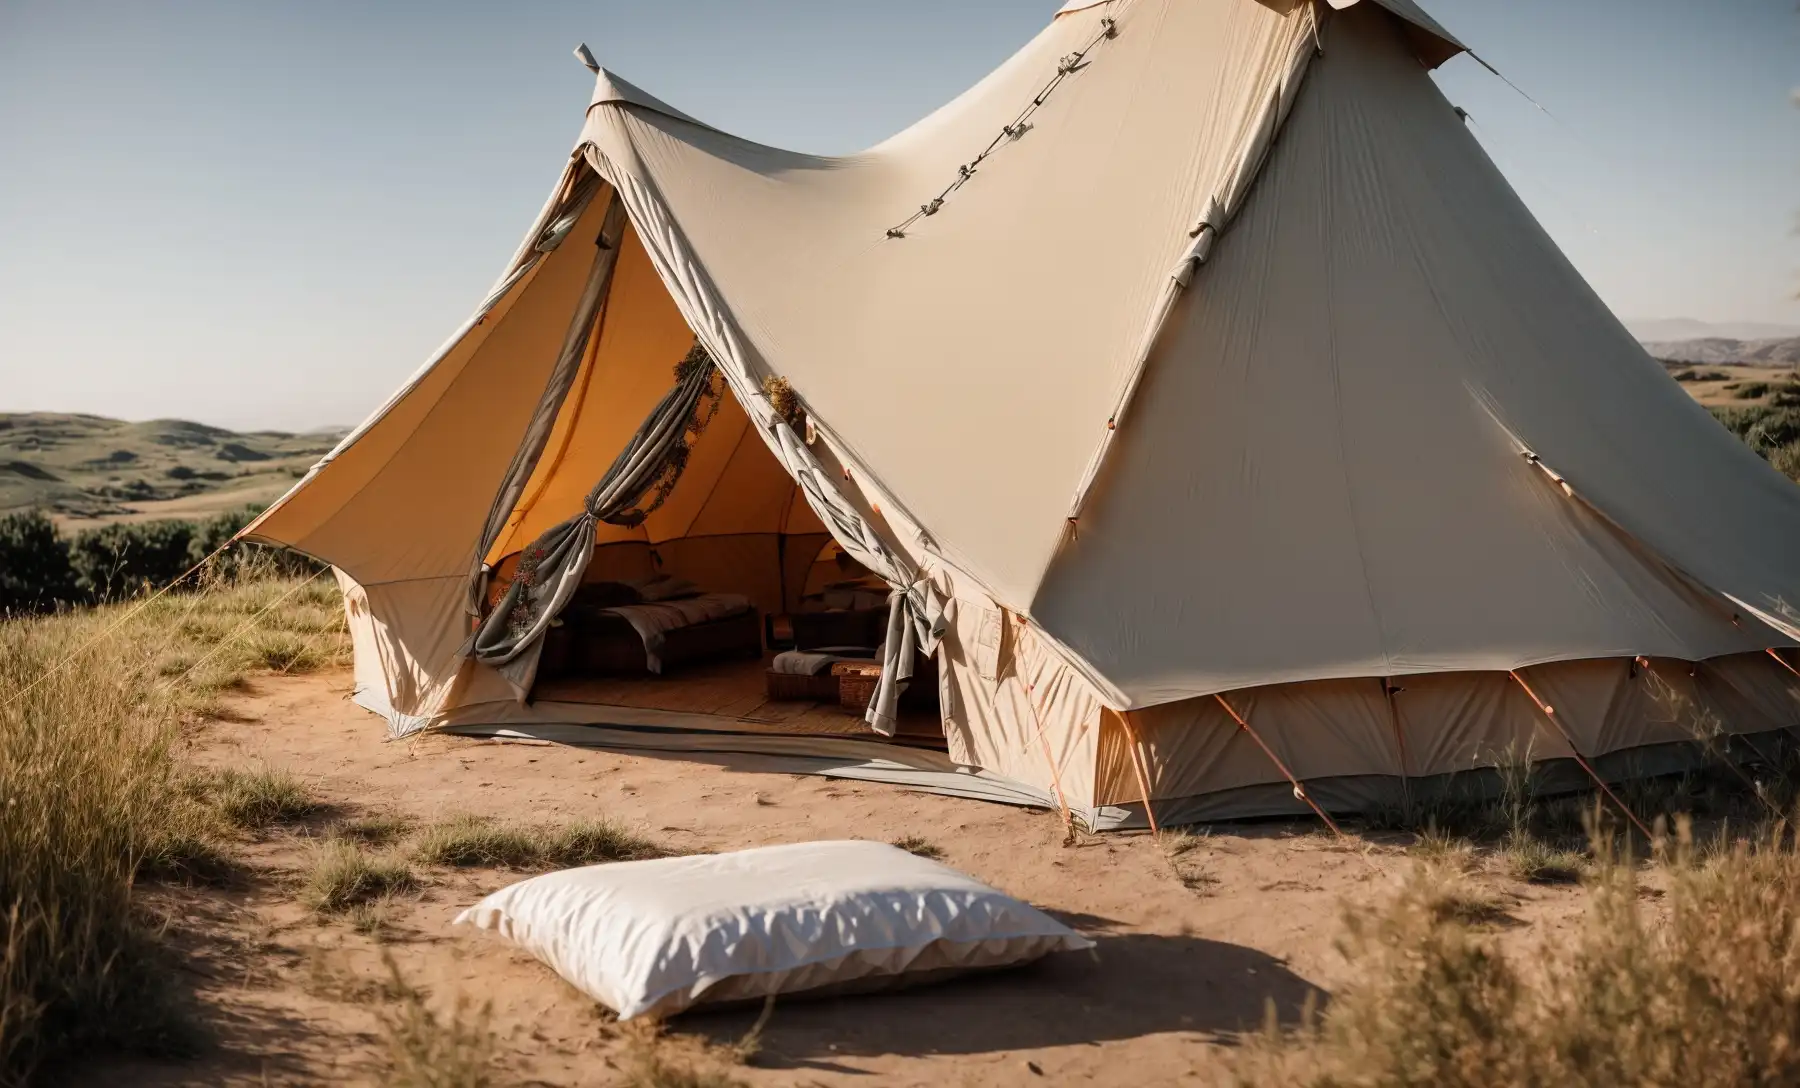 A wall tent